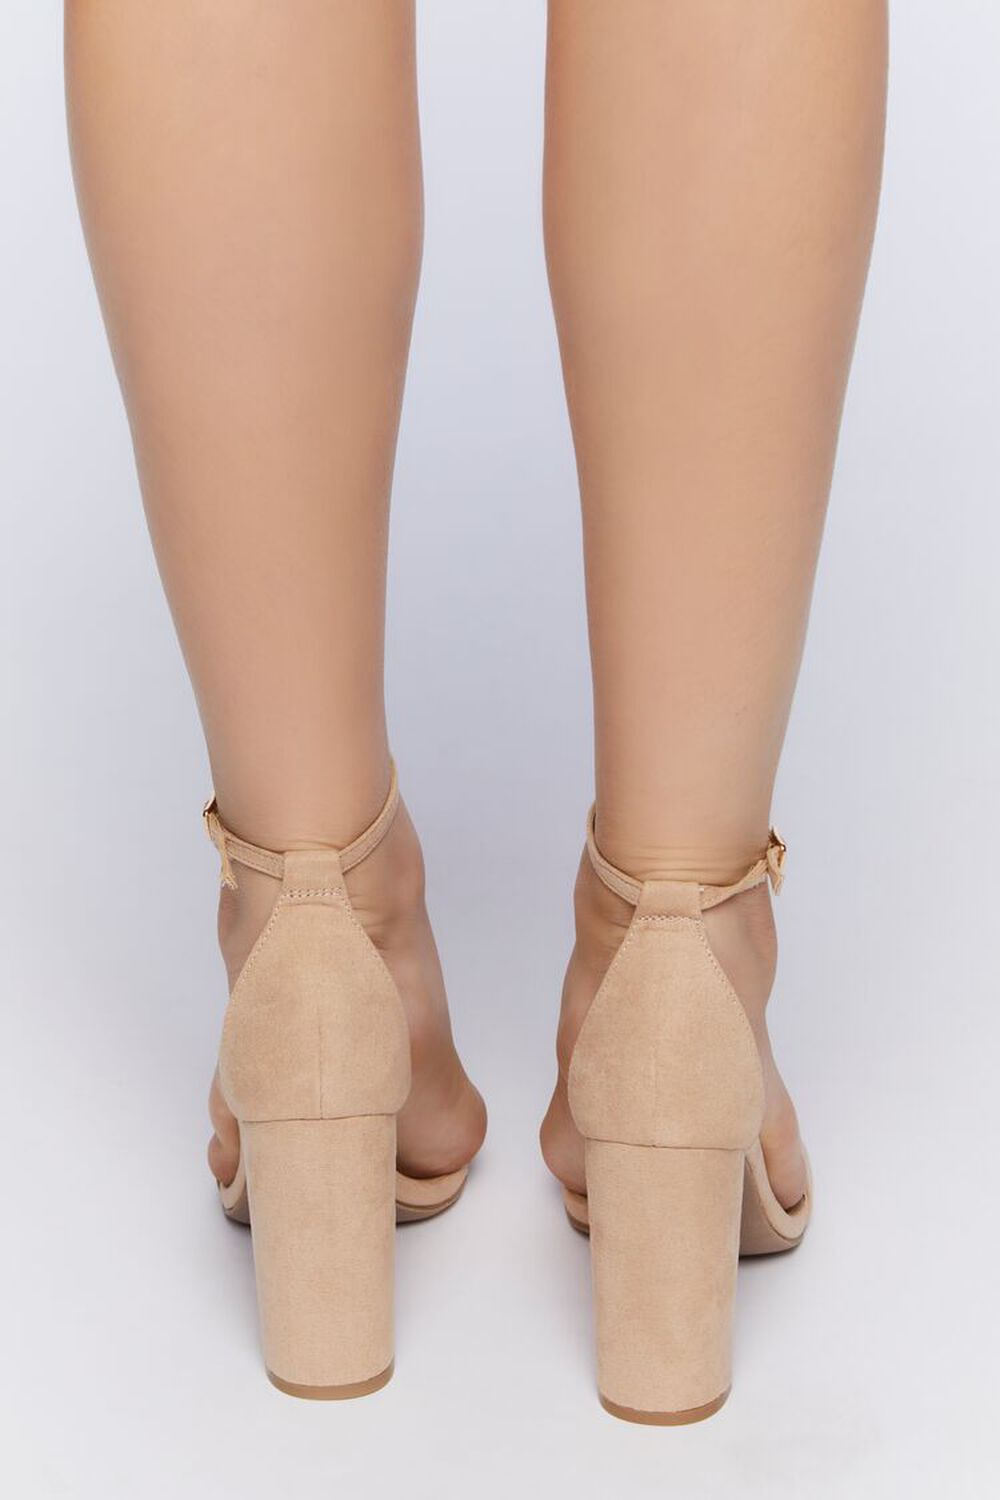 NATURAL Faux Suede Open-Toe Heels, image 3